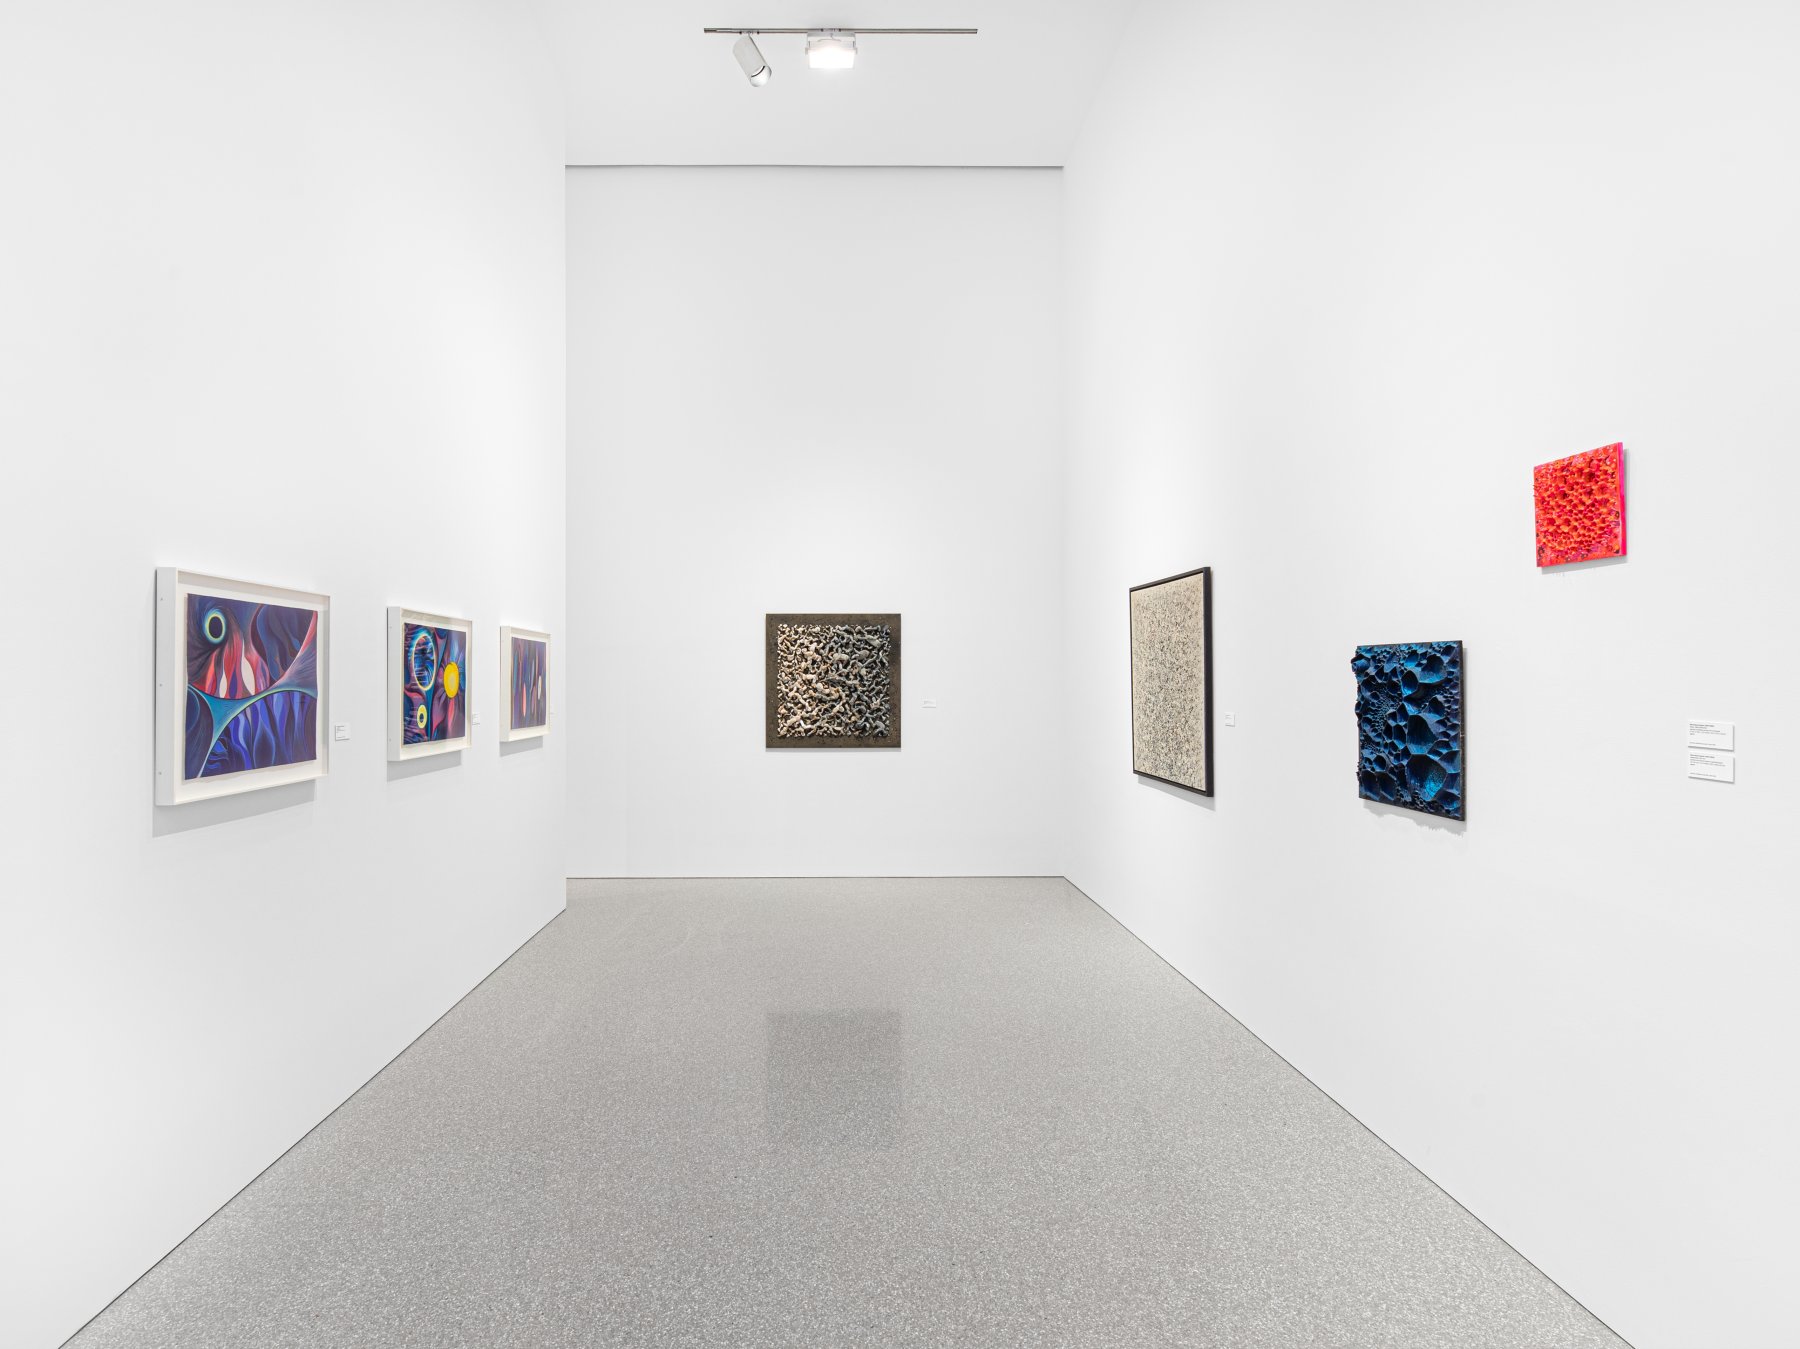 Installation image for Mary Bauermeister: Fuck the System, at Michael Rosenfeld Gallery